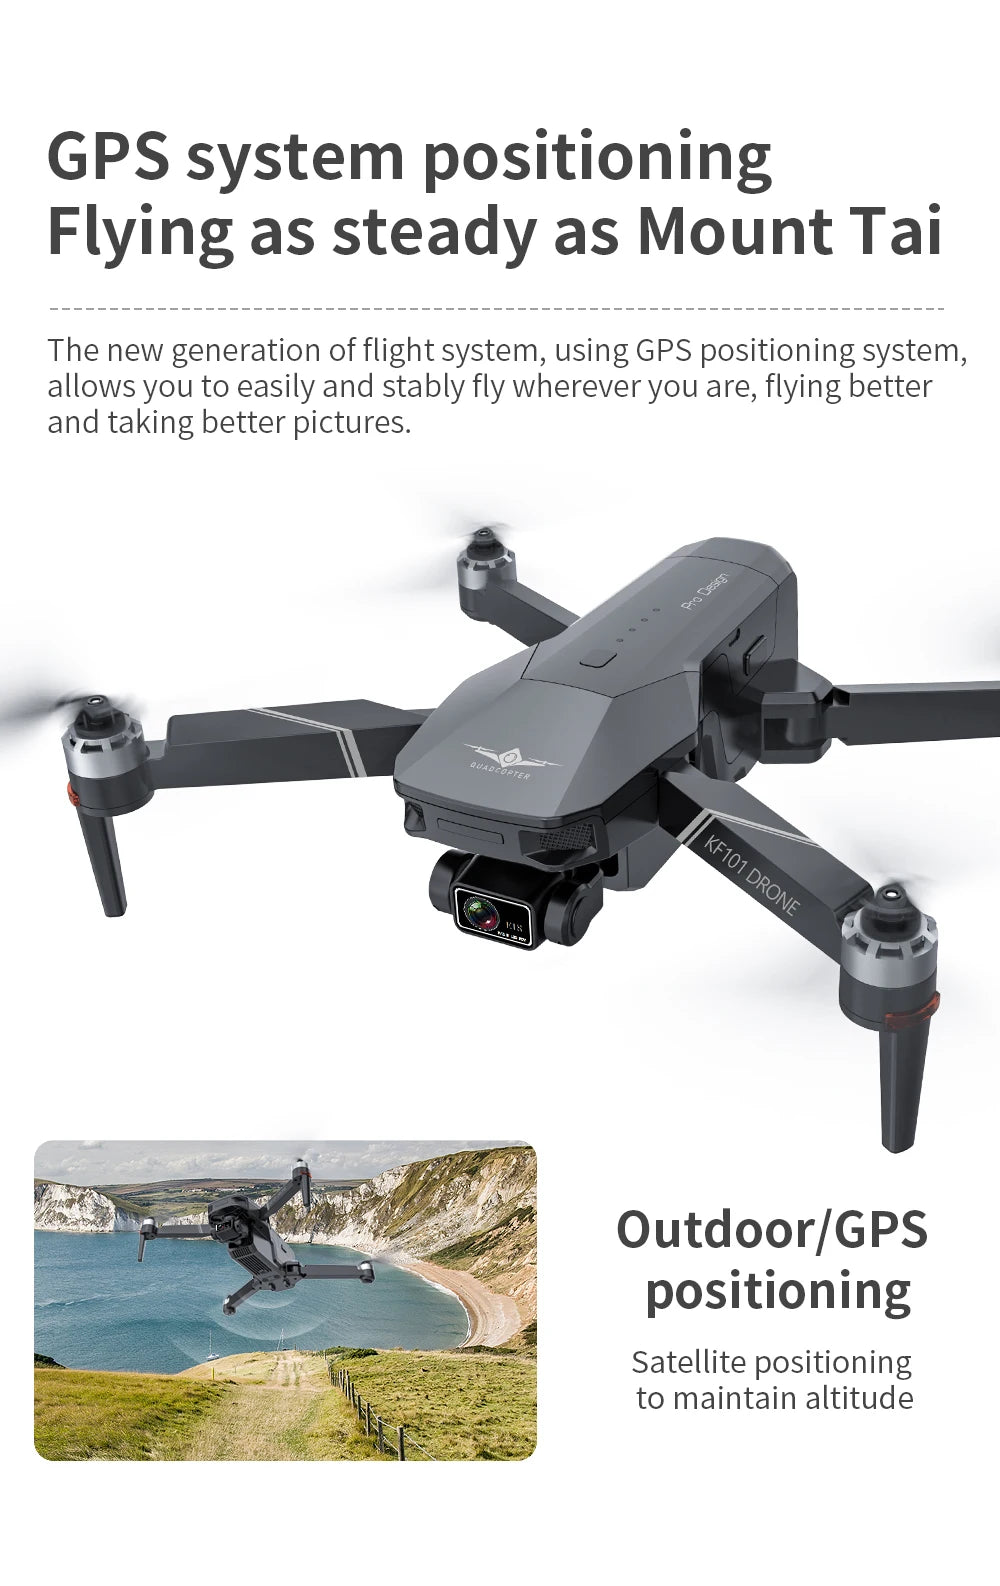 New GPS Drone, GPS system positioning allows you to easily and stably fly wherever you are; flying better and